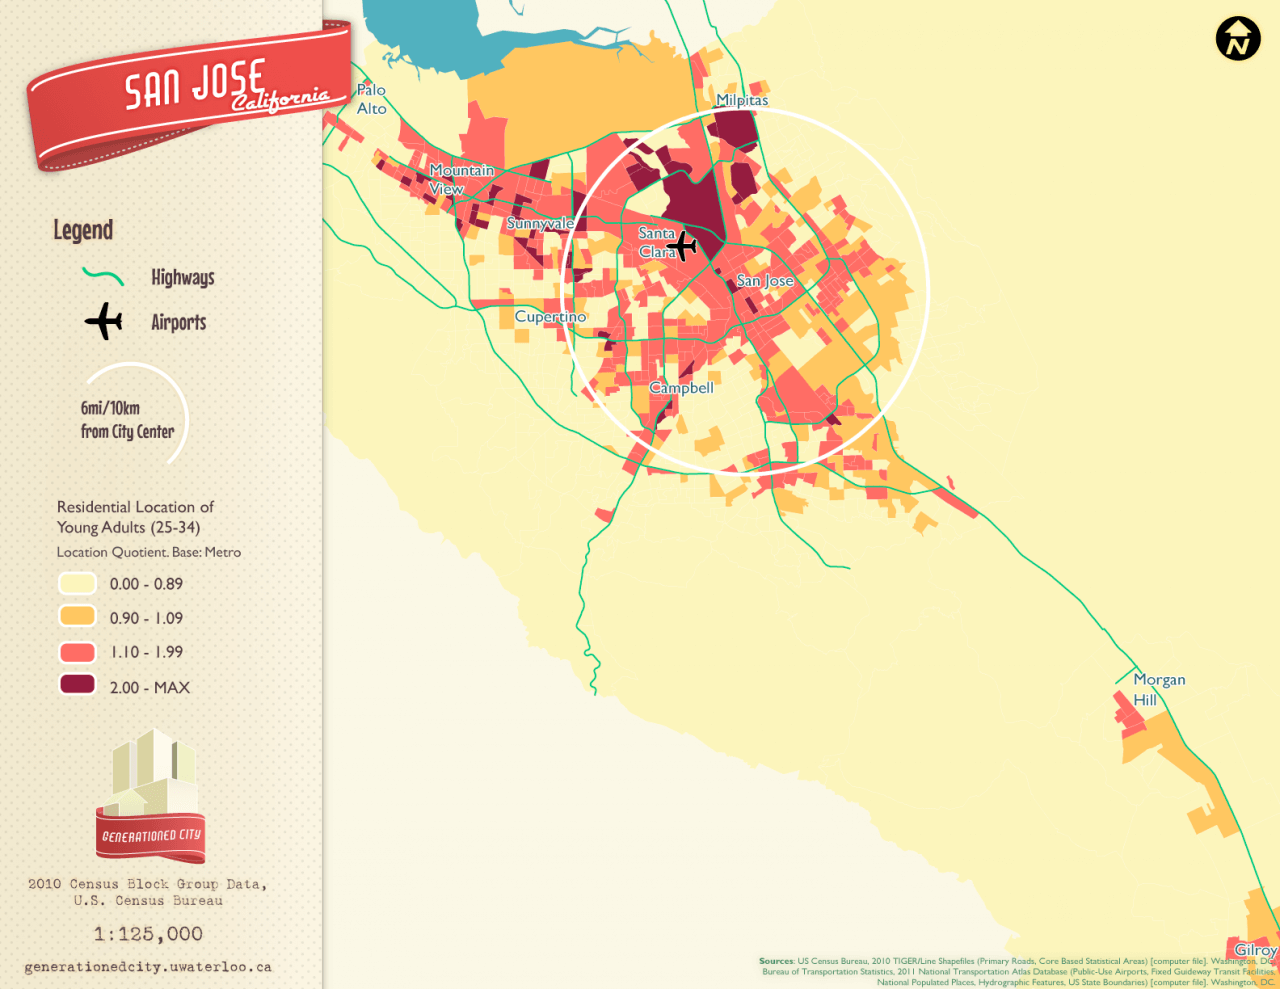 Residential location of young adults in San Jose.